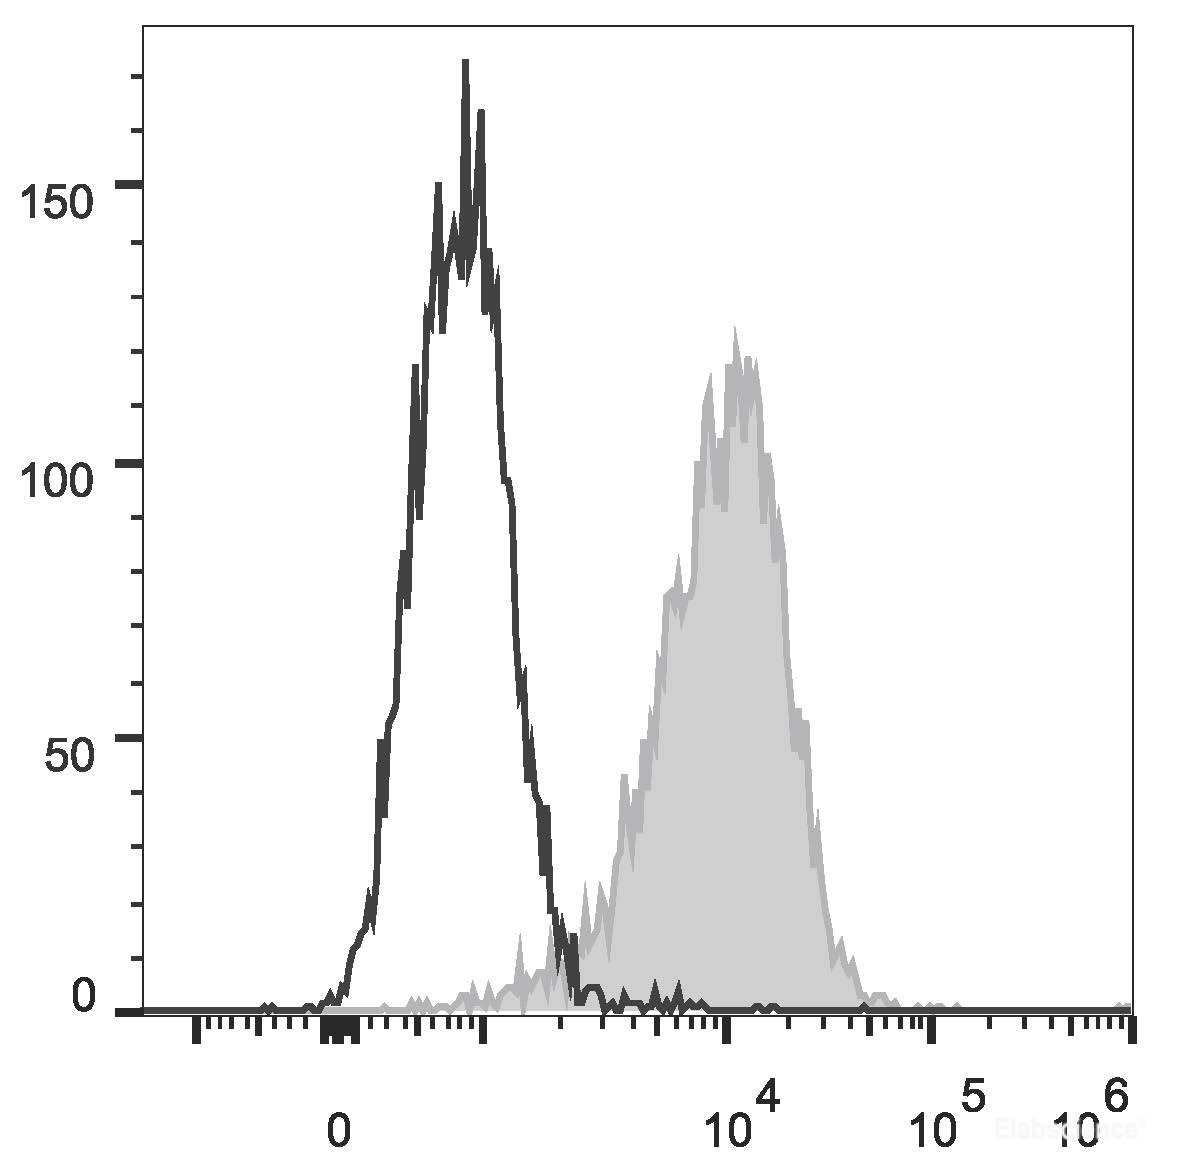 Daudi (human B Burkitt's lymphoma cell line) cells are stained with PE/Cyanine7 Anti-Human CD80 Antibody (filled gray histogram).Unstained Daudi cells (empty black histogram) are used as control.